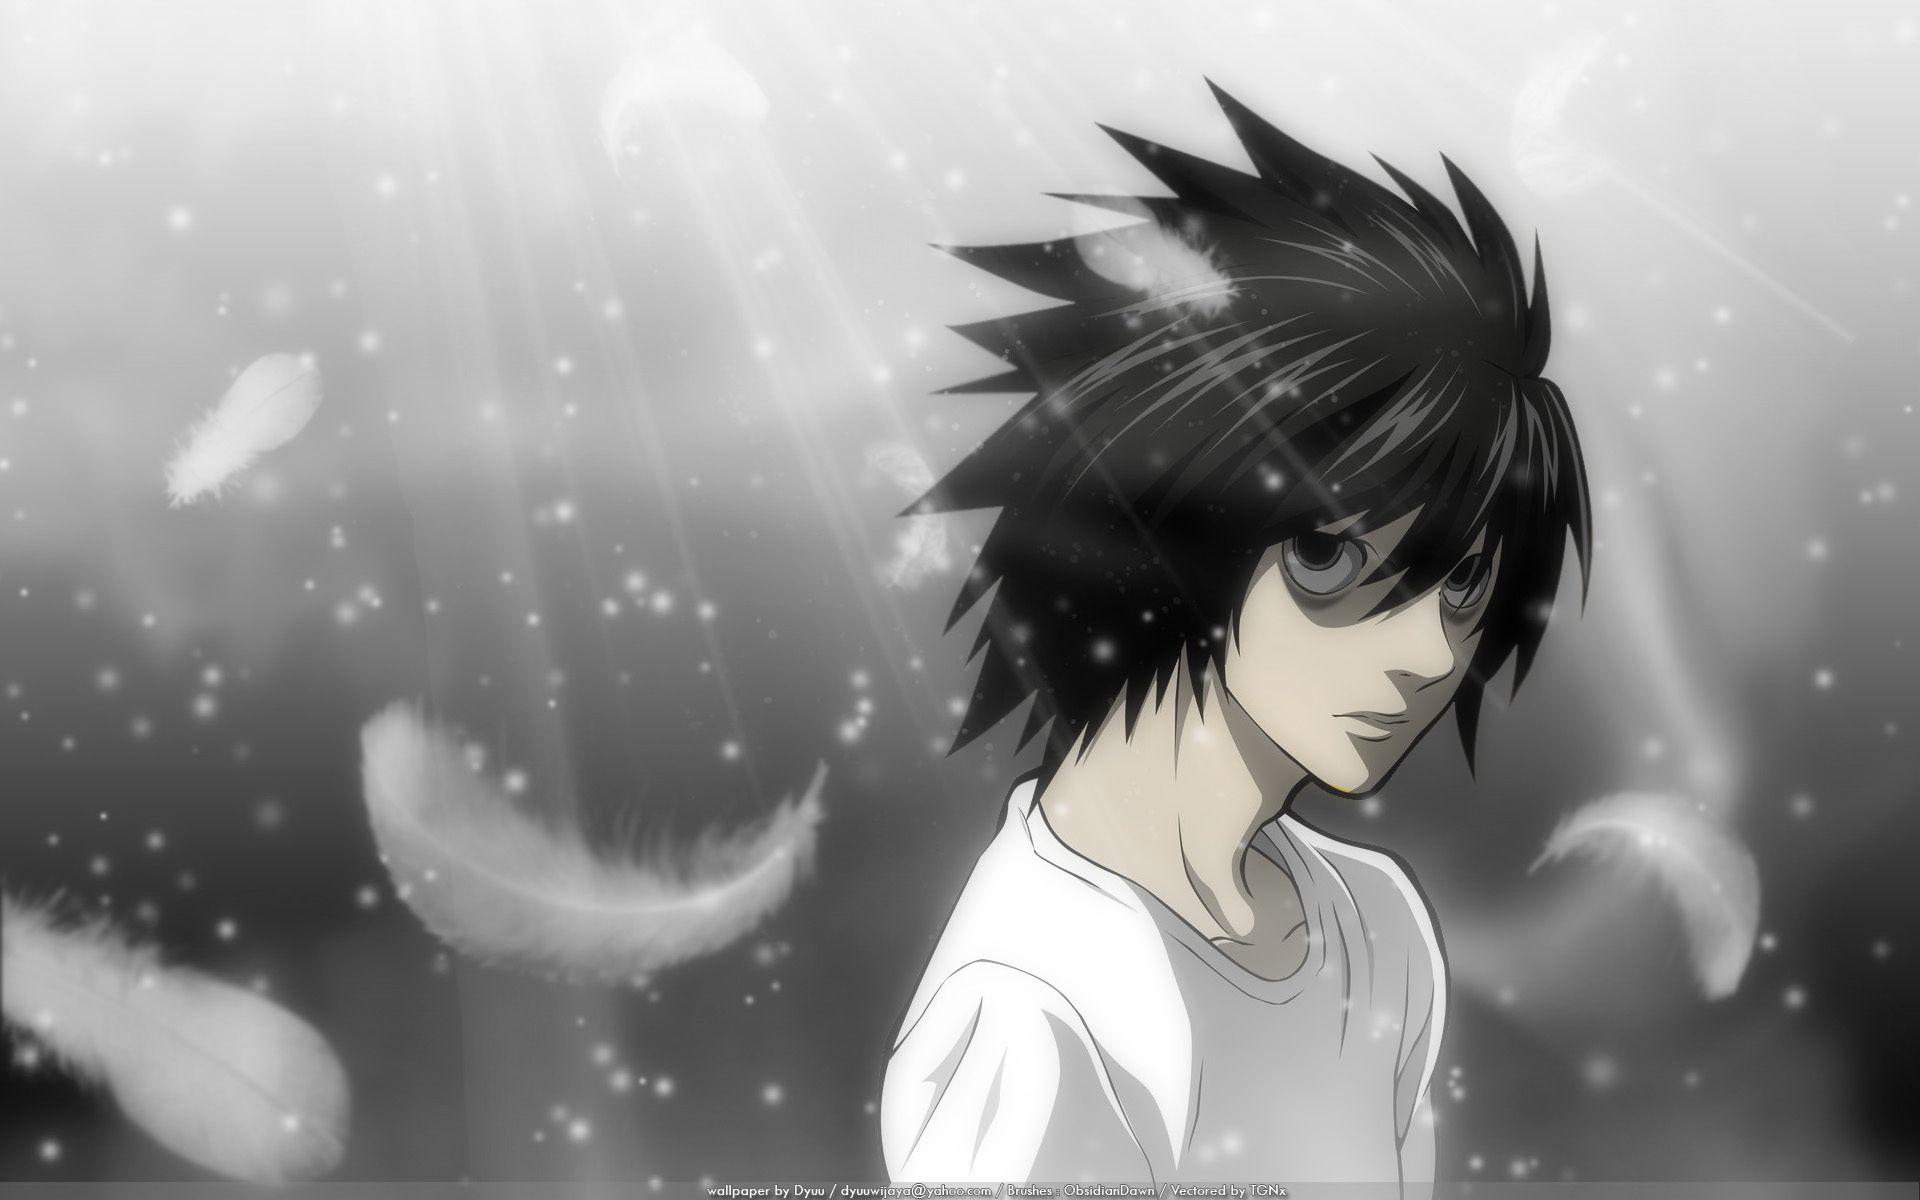 Death Note image Death Note HD wallpaper and background photo